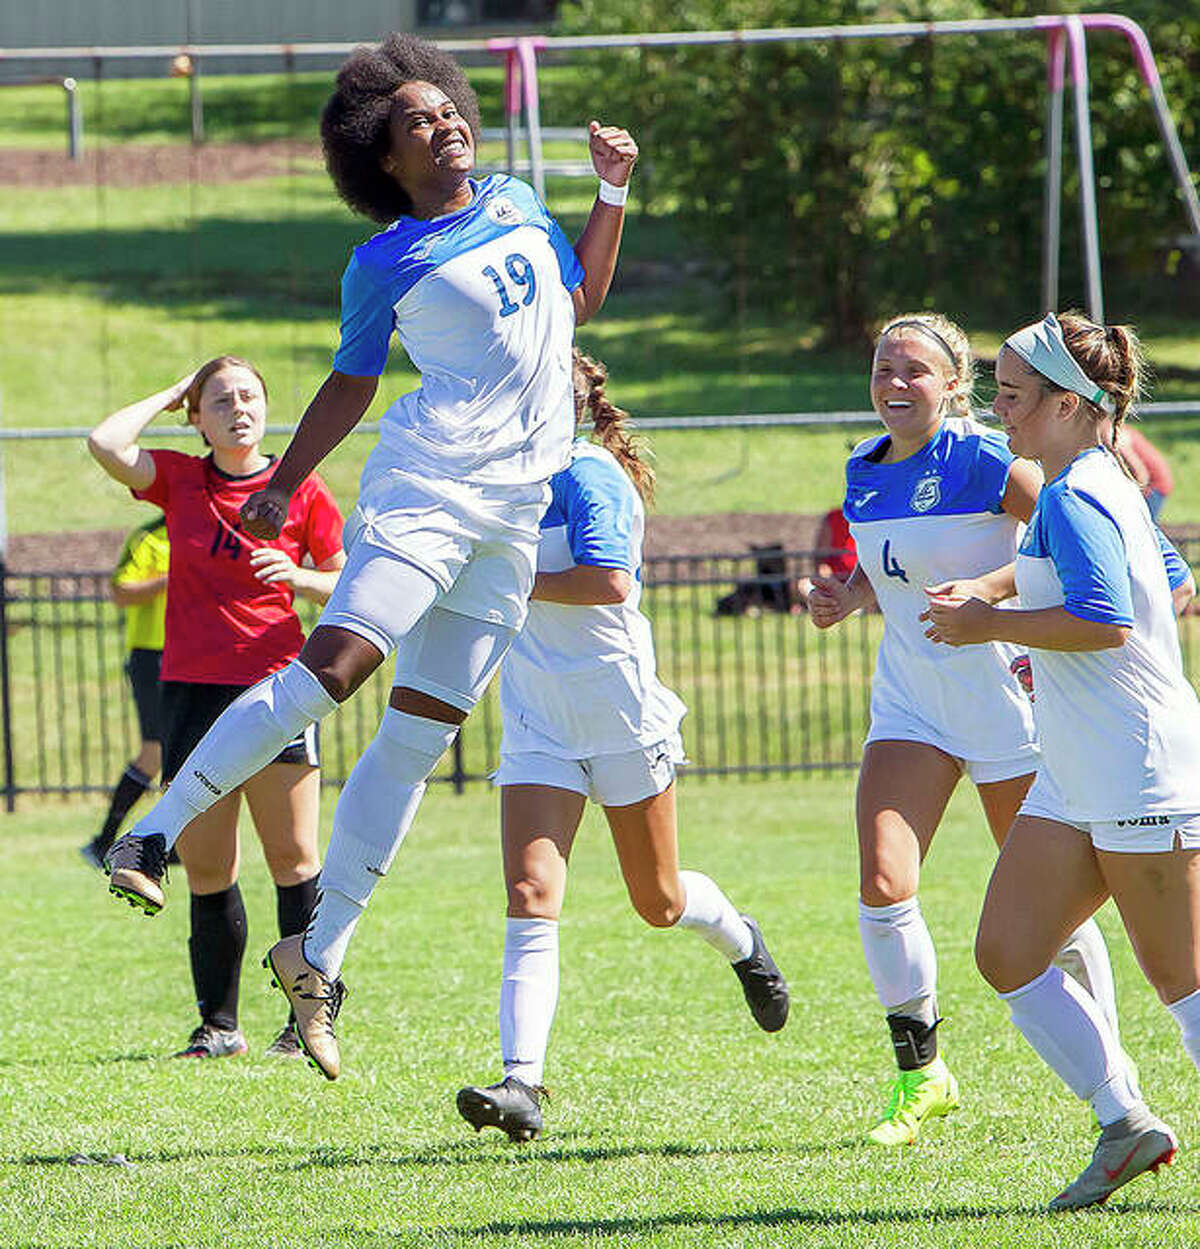 Freshman Chrissy Mitchell (19) leaps into the air to celebrate one of her two goals against Wabash Valley in Saturday’s 2-0 Region 24 victory at Tim Rooney Stadium.